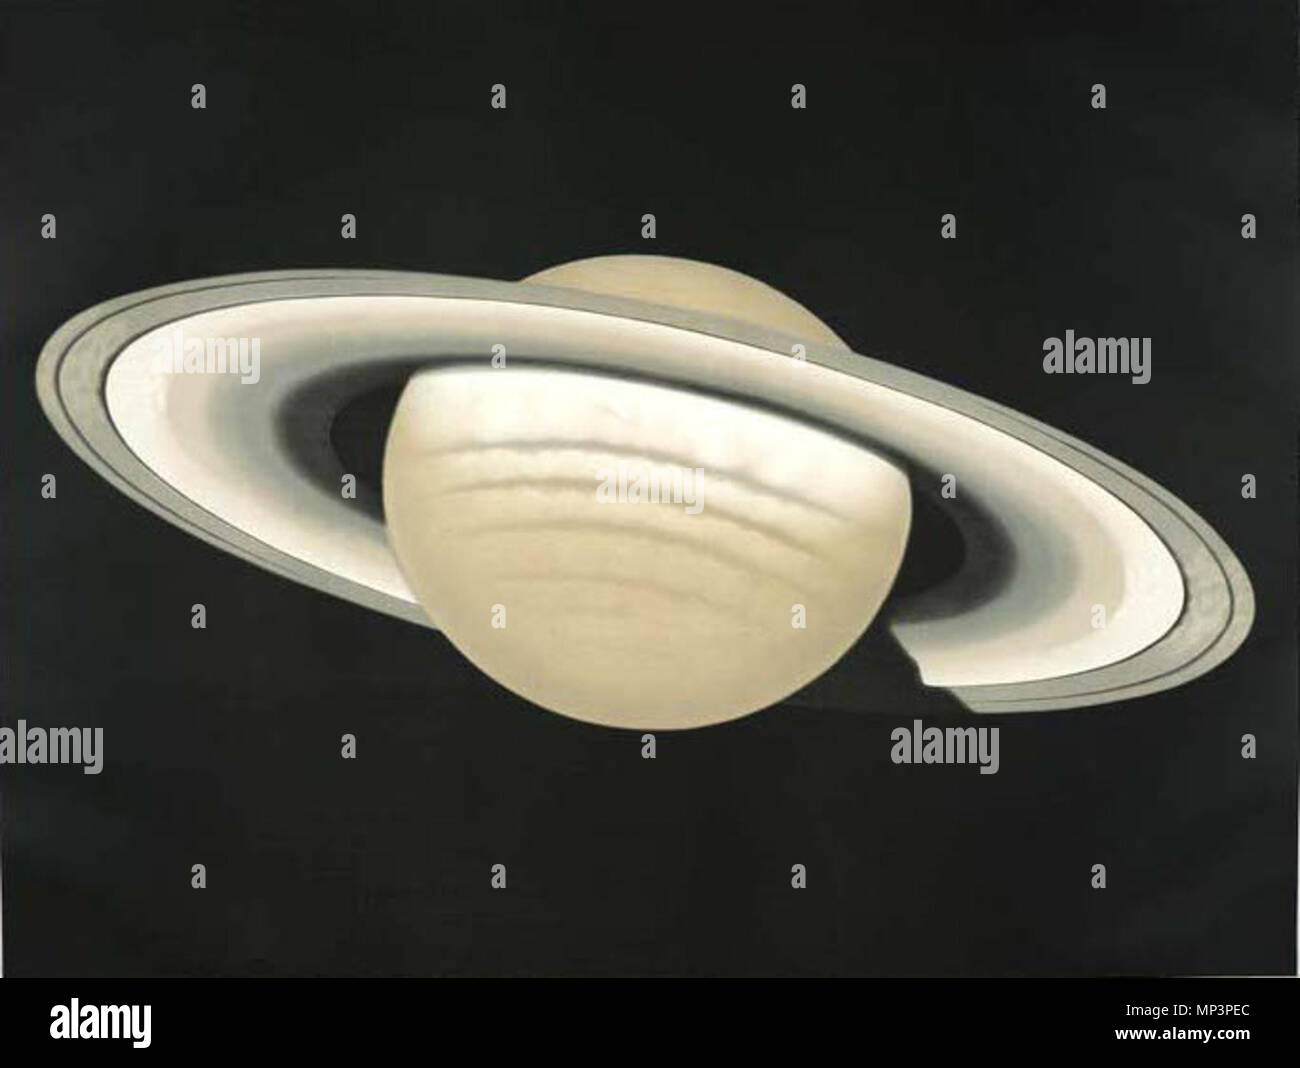 . The planet Saturn. Observed on November 30, 1874, at 5h. 30m. P.M. (Plate X from The Trouvelot Astronomical Drawings 1881-1882) .   Étienne Léopold Trouvelot  (1827–1895)     Alternative names Etienne Leopold Trouvelot  Description French artist, illustrator, astronomer and biologist  Date of birth/death 26 December 1827 22 April 1895  Location of birth/death Aisne, France Meudon, France  Authority control  : Q32426 VIAF: 301151310 ISNI: 0000 0004 0849 0171 GND: 1035177501 SUDOC: 172639069 1206 Trouvelot - The planet Saturn - 1874 Stock Photo